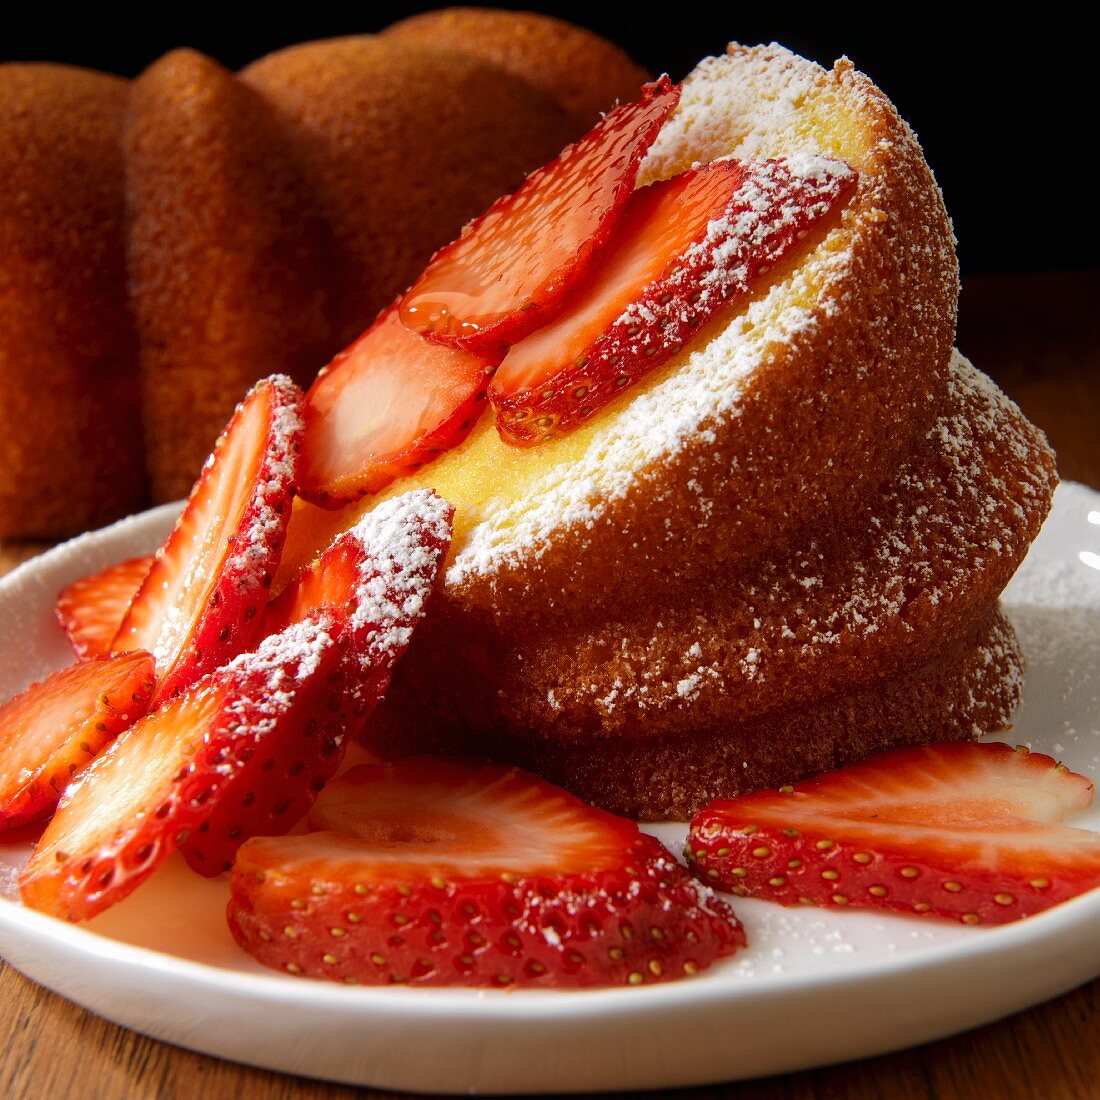 Bundt Cake with sliced strawberries and powdered sugar